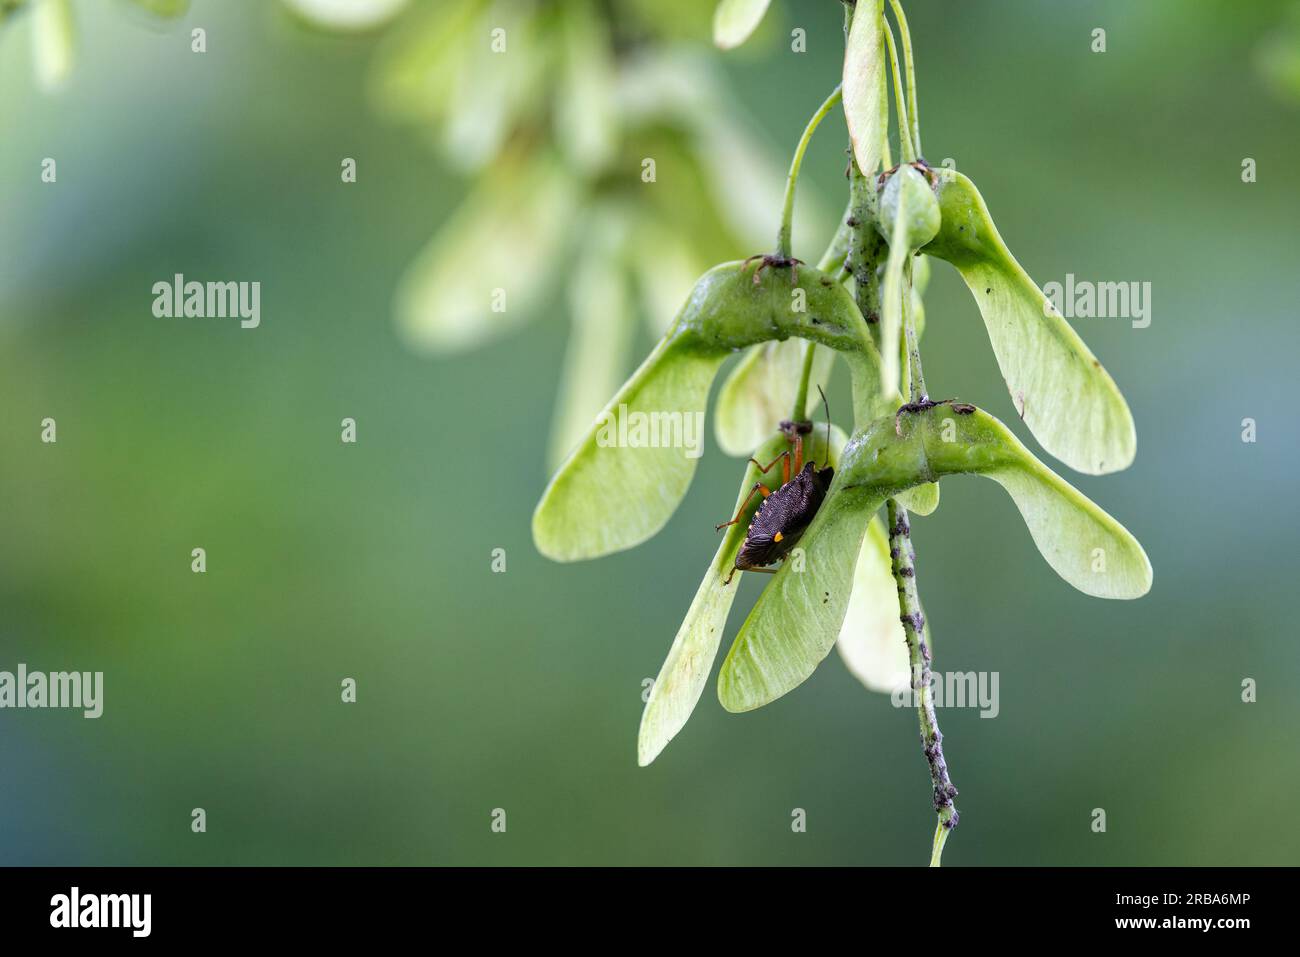 Close up of a small cluster of Sycamore tree winged seeds on twig with shield bug Stock Photo